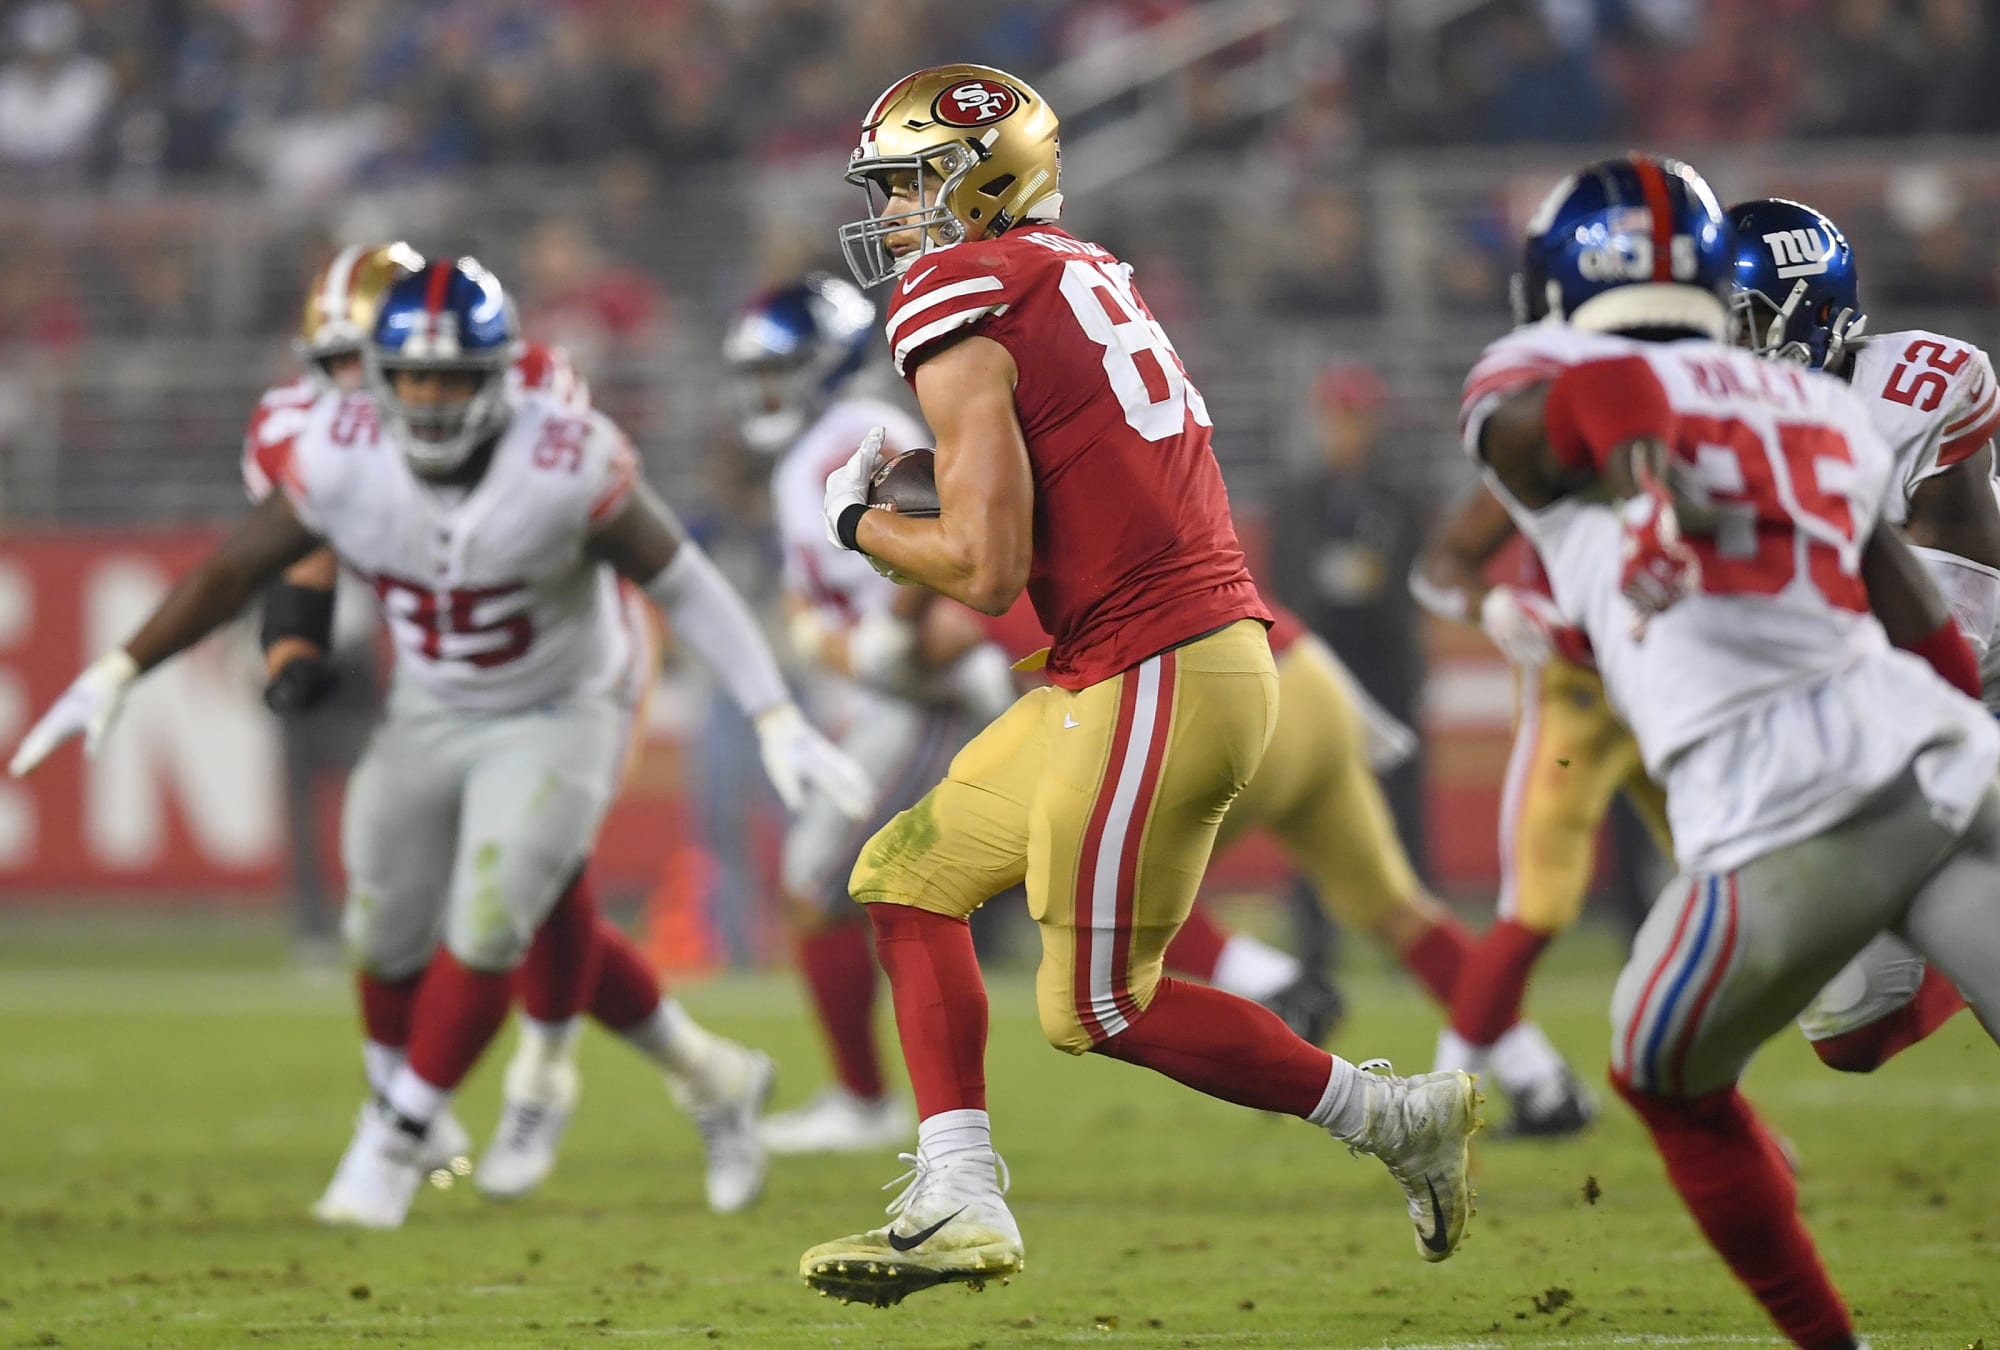 49ers Game breakdown and prediction for Week 3 at New York Giants